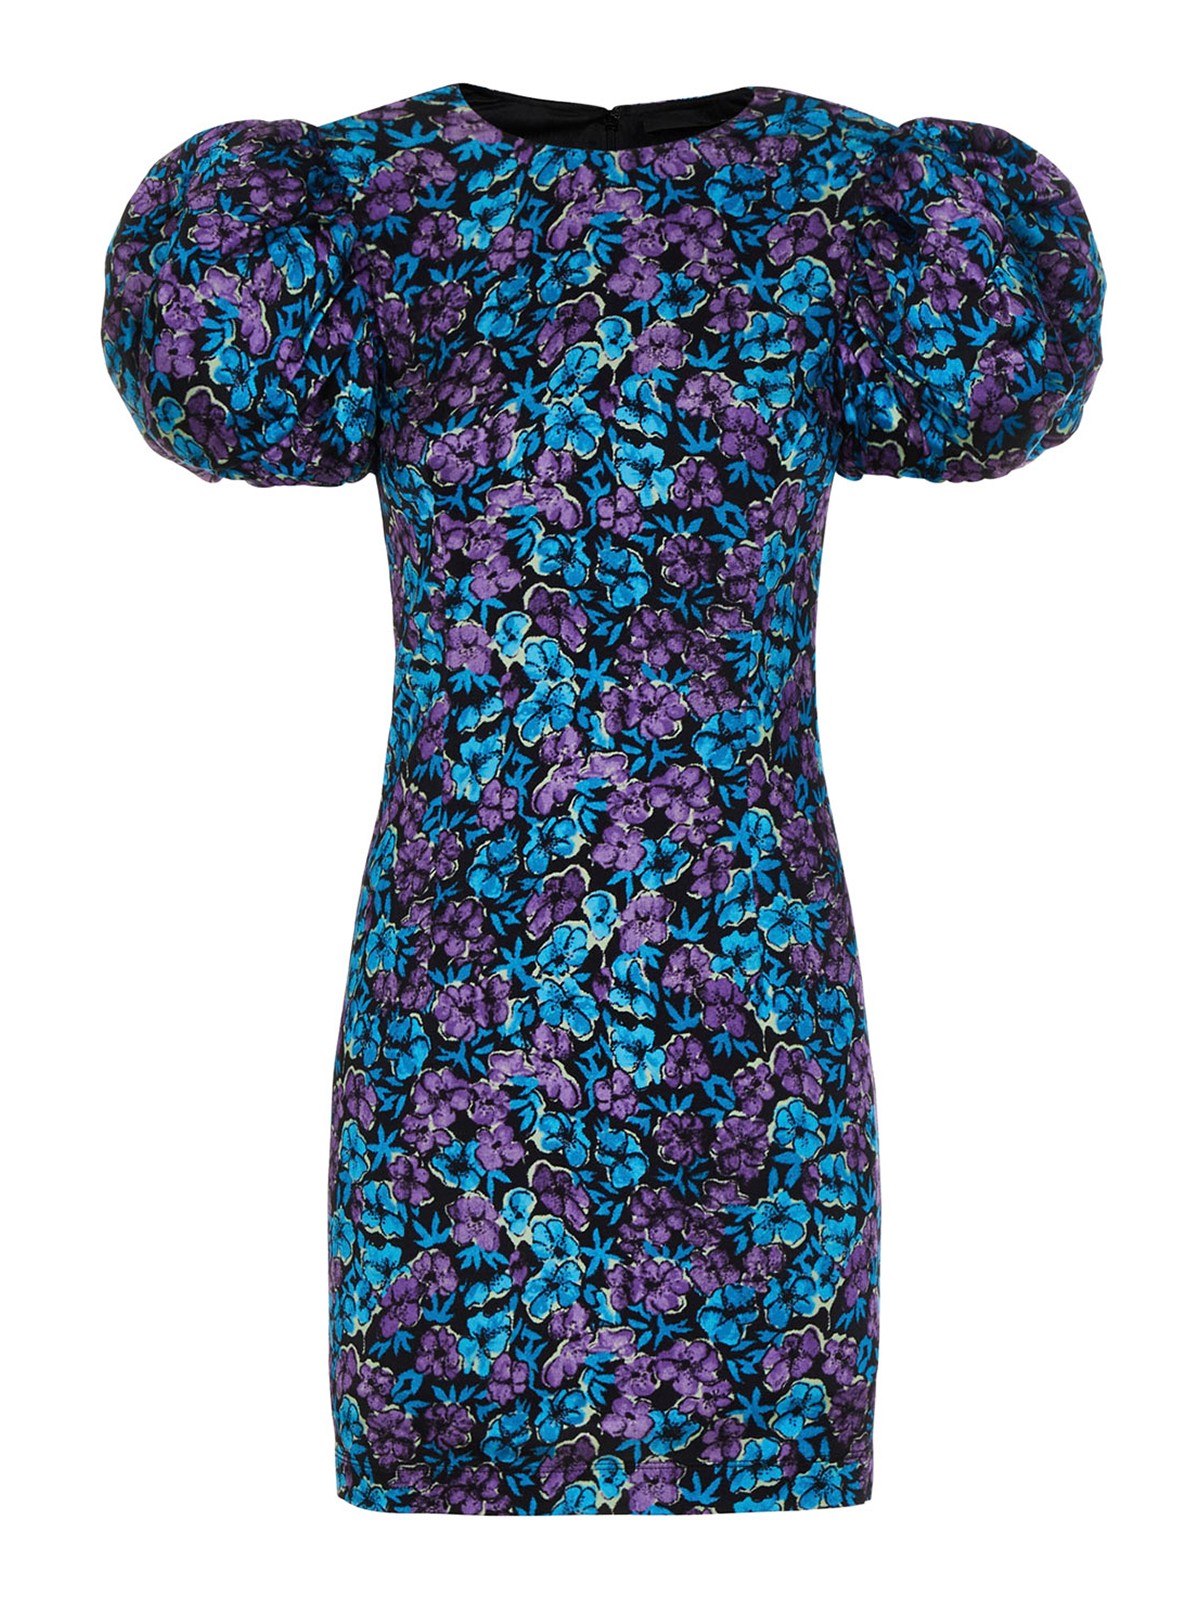 Rotate Birger Christensen Floral Dress With Puff Sleeves In Multicolour